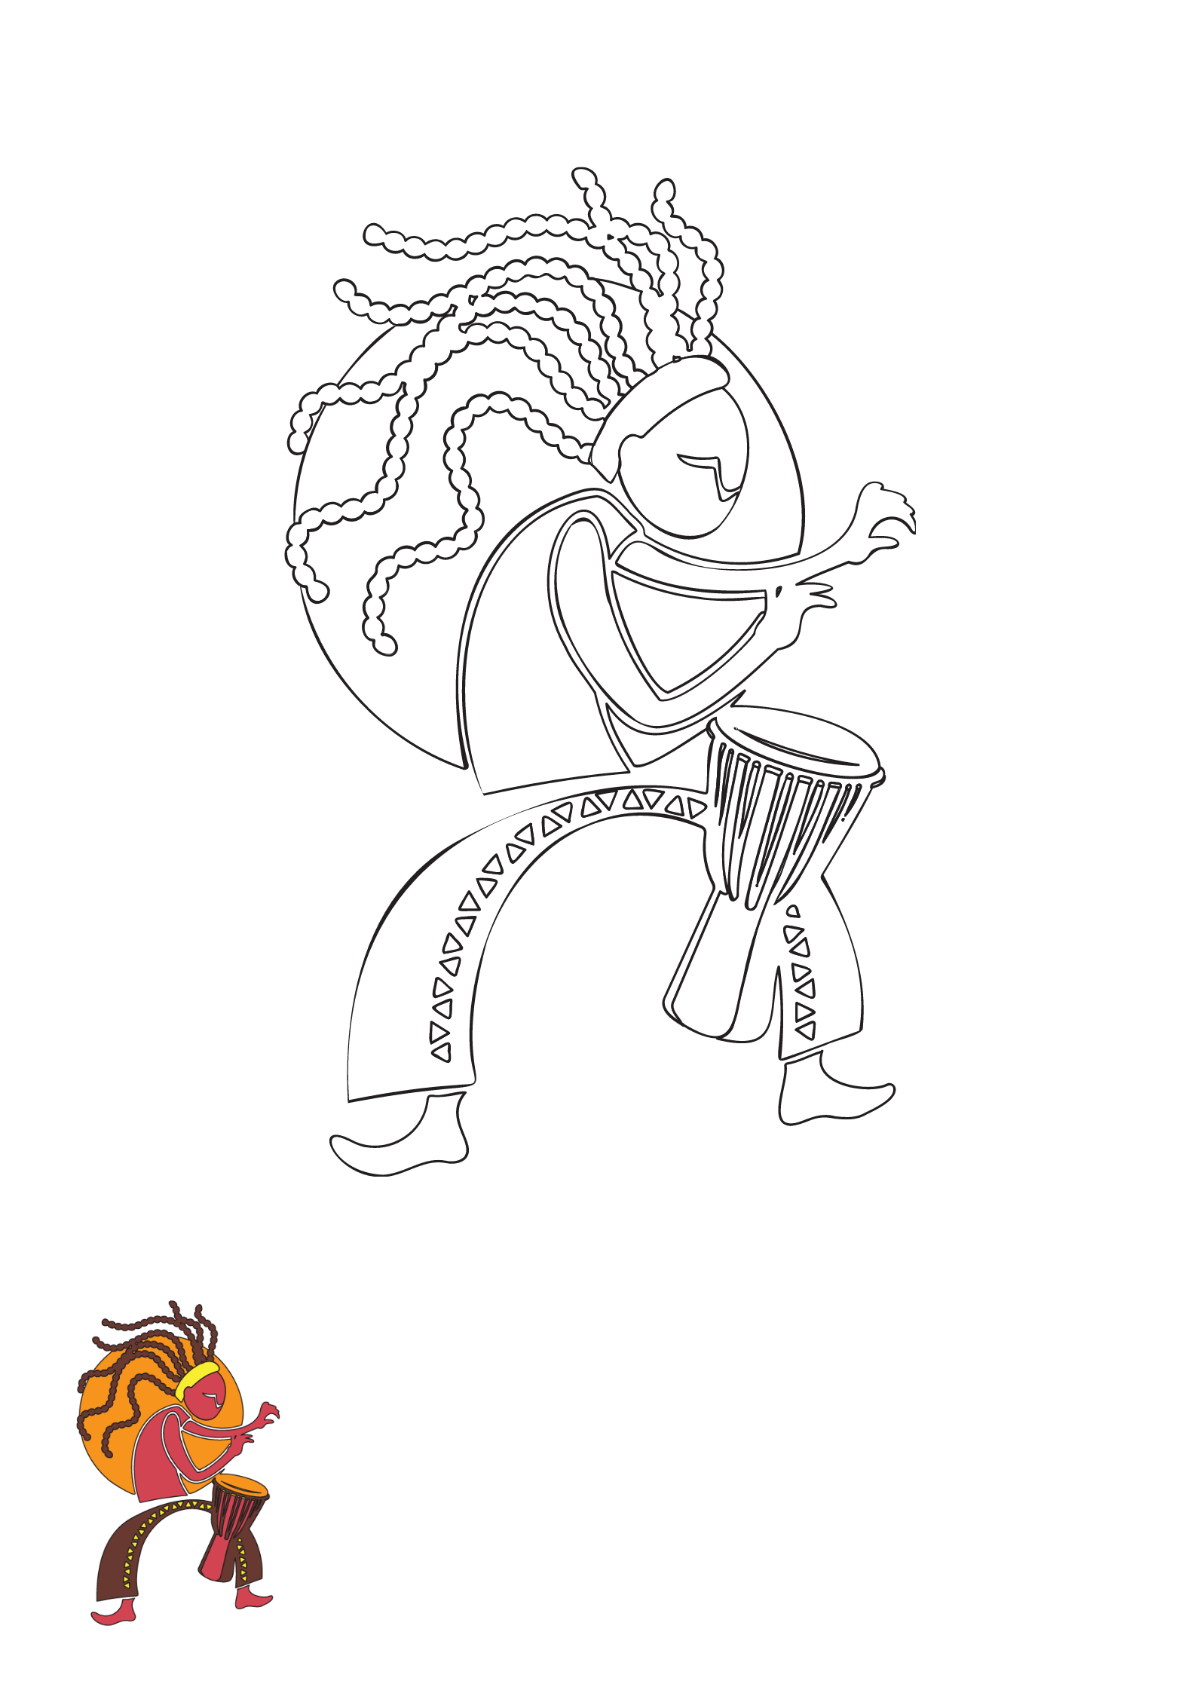 Tribal Music Coloring Page Template